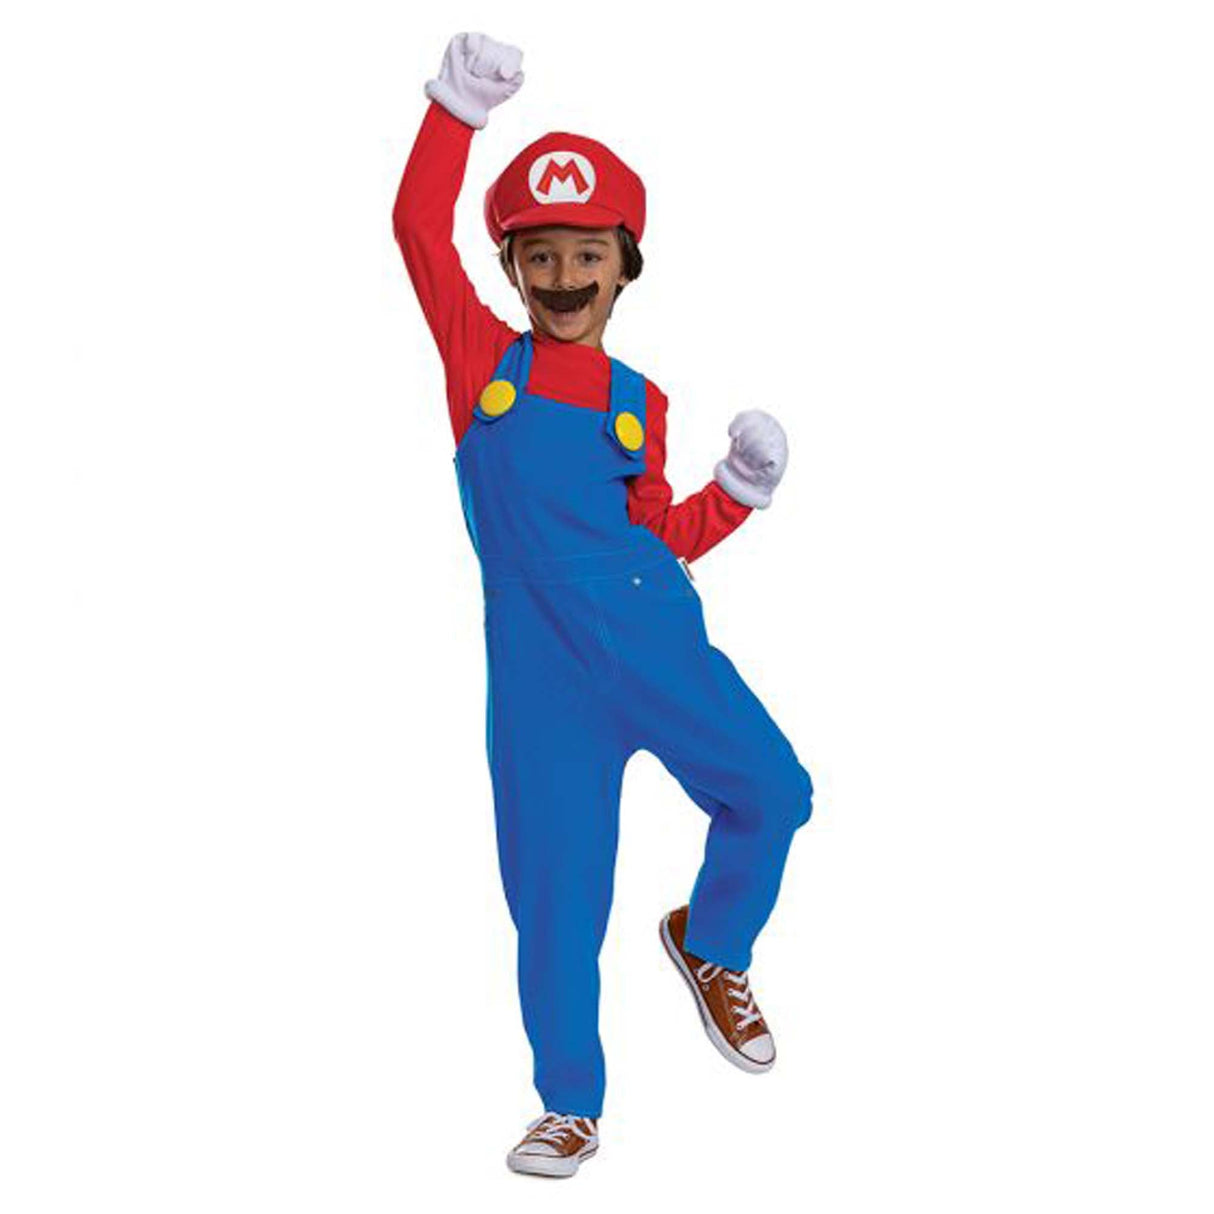 DISGUISE (TOY-SPORT) Costumes Super Mario Overalls Costume for Kids, Blue Overalls